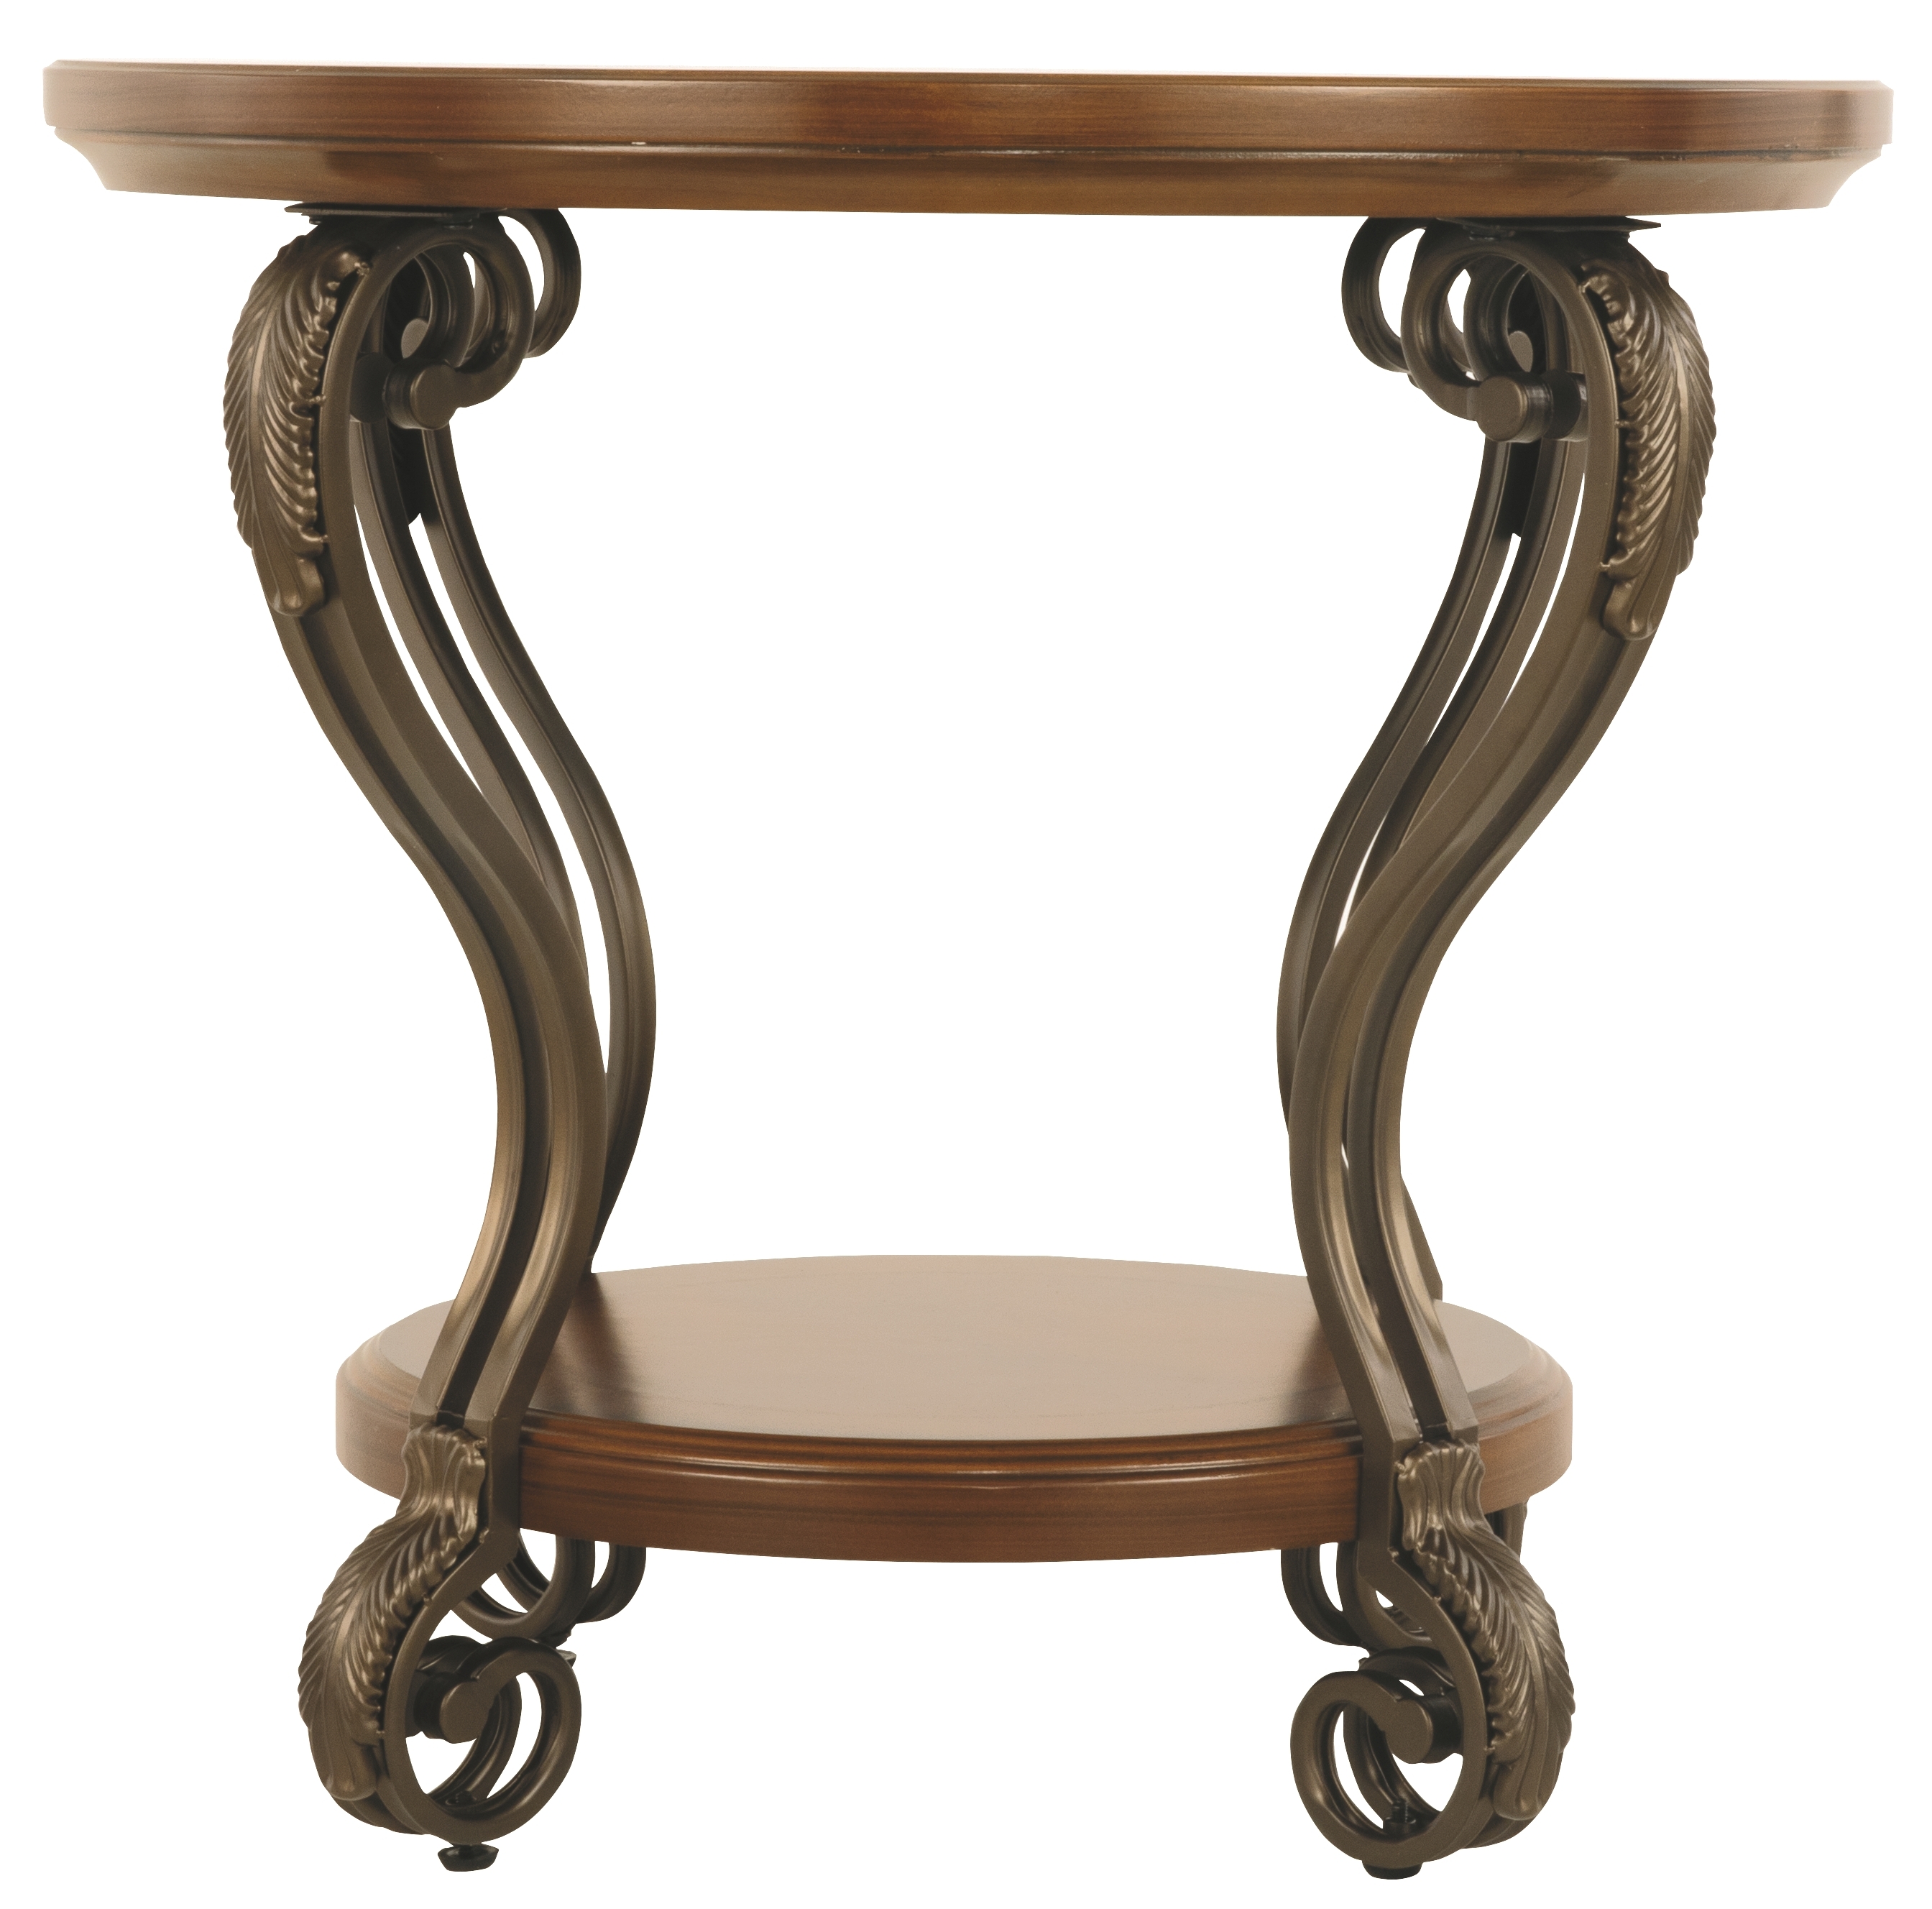 Round End Table With A Bottom Shelf And Designed Curvy Legs, Brown- Saltoro Sherpi